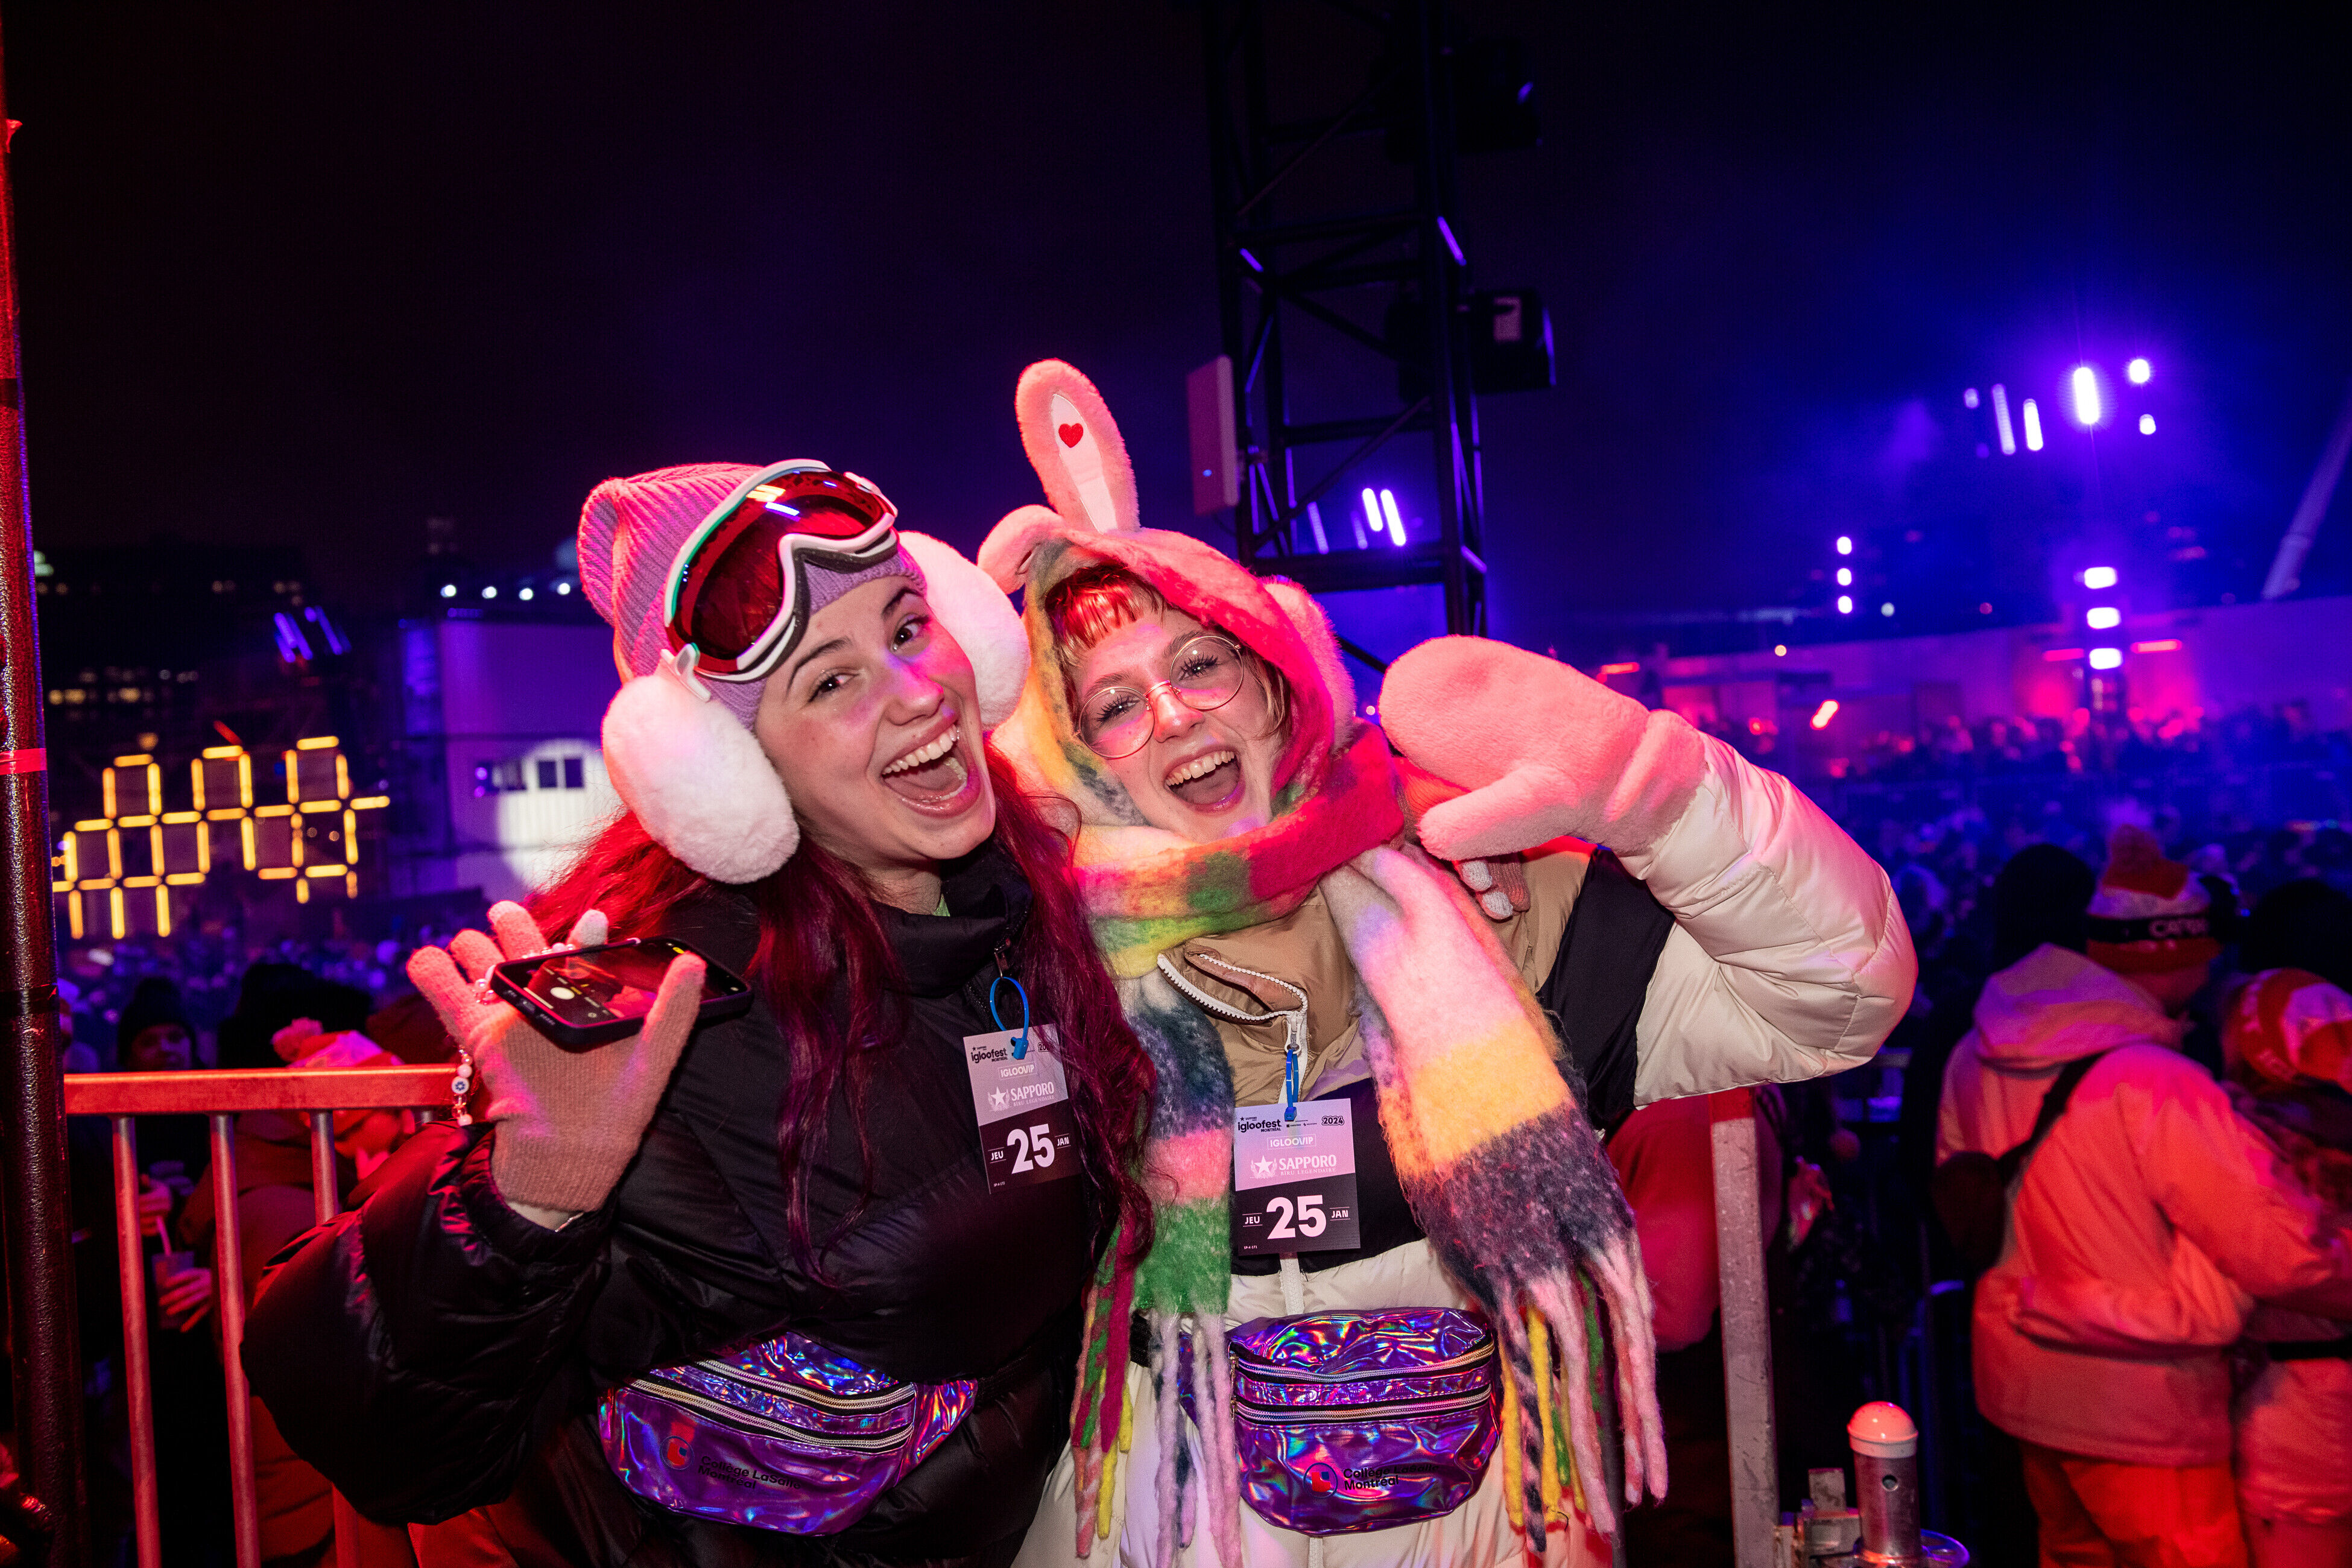 Two women in vibrant winter outfits, with one wearing ski goggles and earmuffs, the other with a colorful scarf, are smiling joyfully at a nighttime outdoor event.